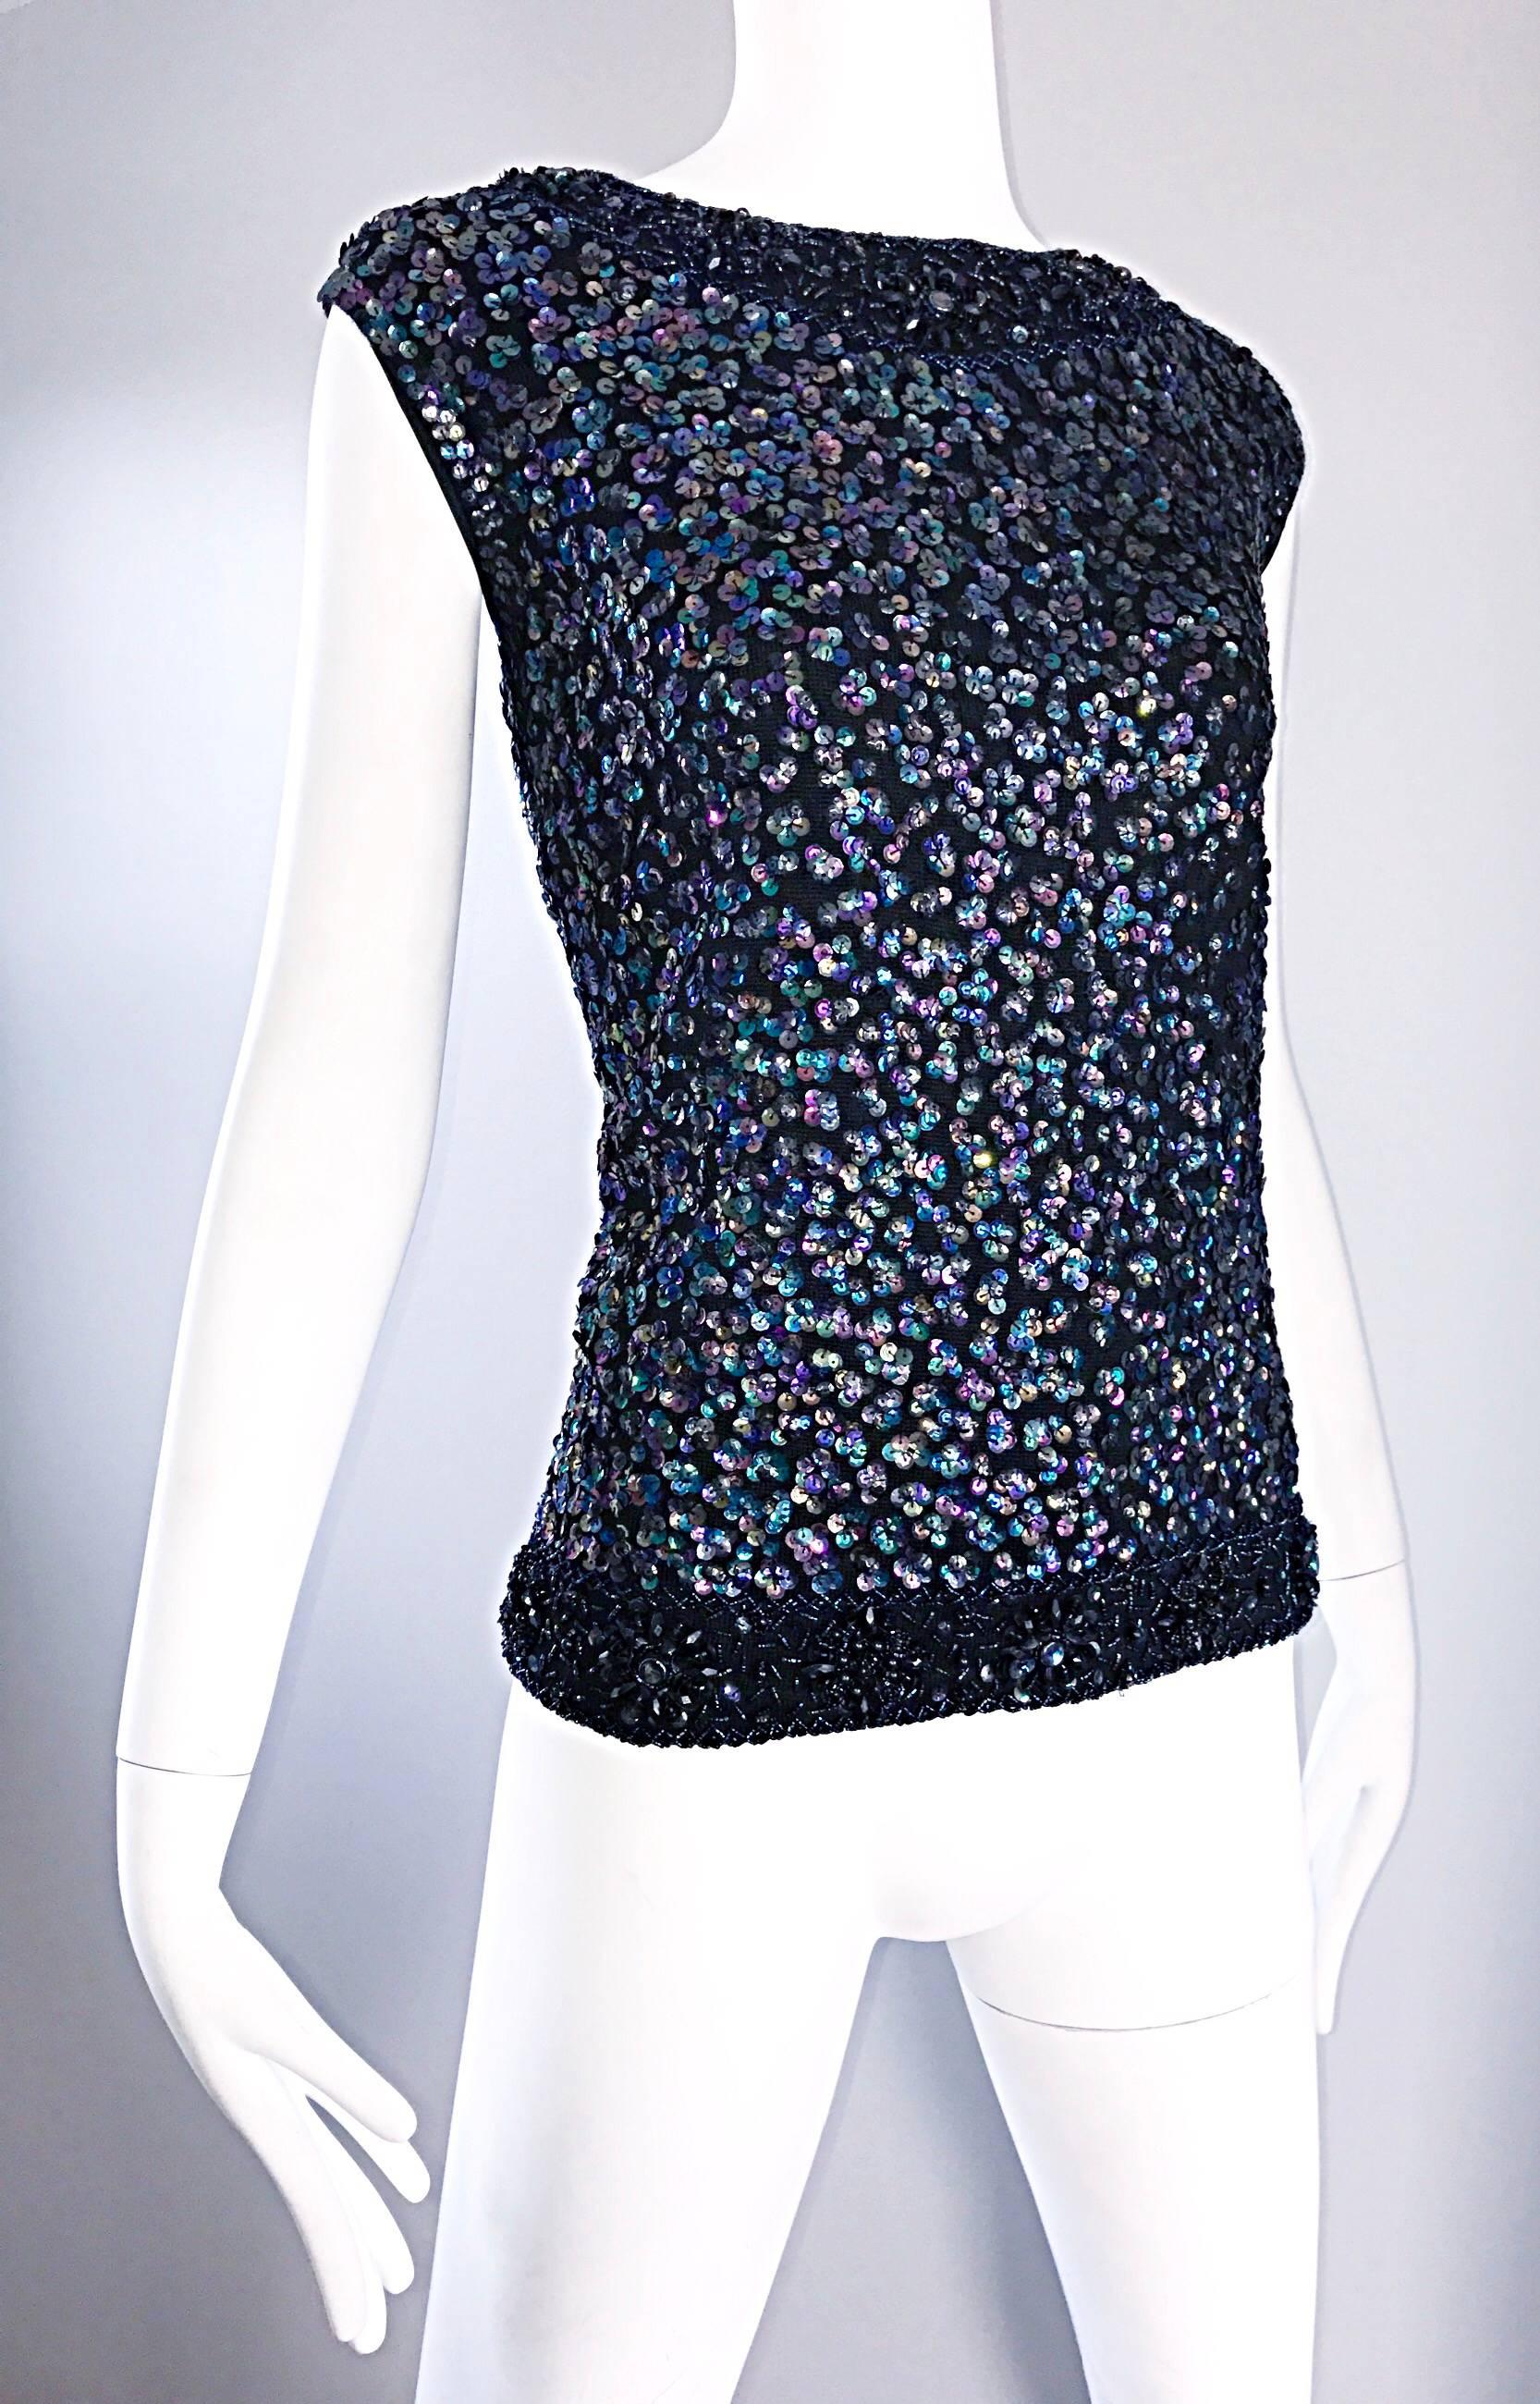 Larger Size 1960s Londoner Black Sequined Wool Sleeveless Vintage Sweater Top For Sale 4